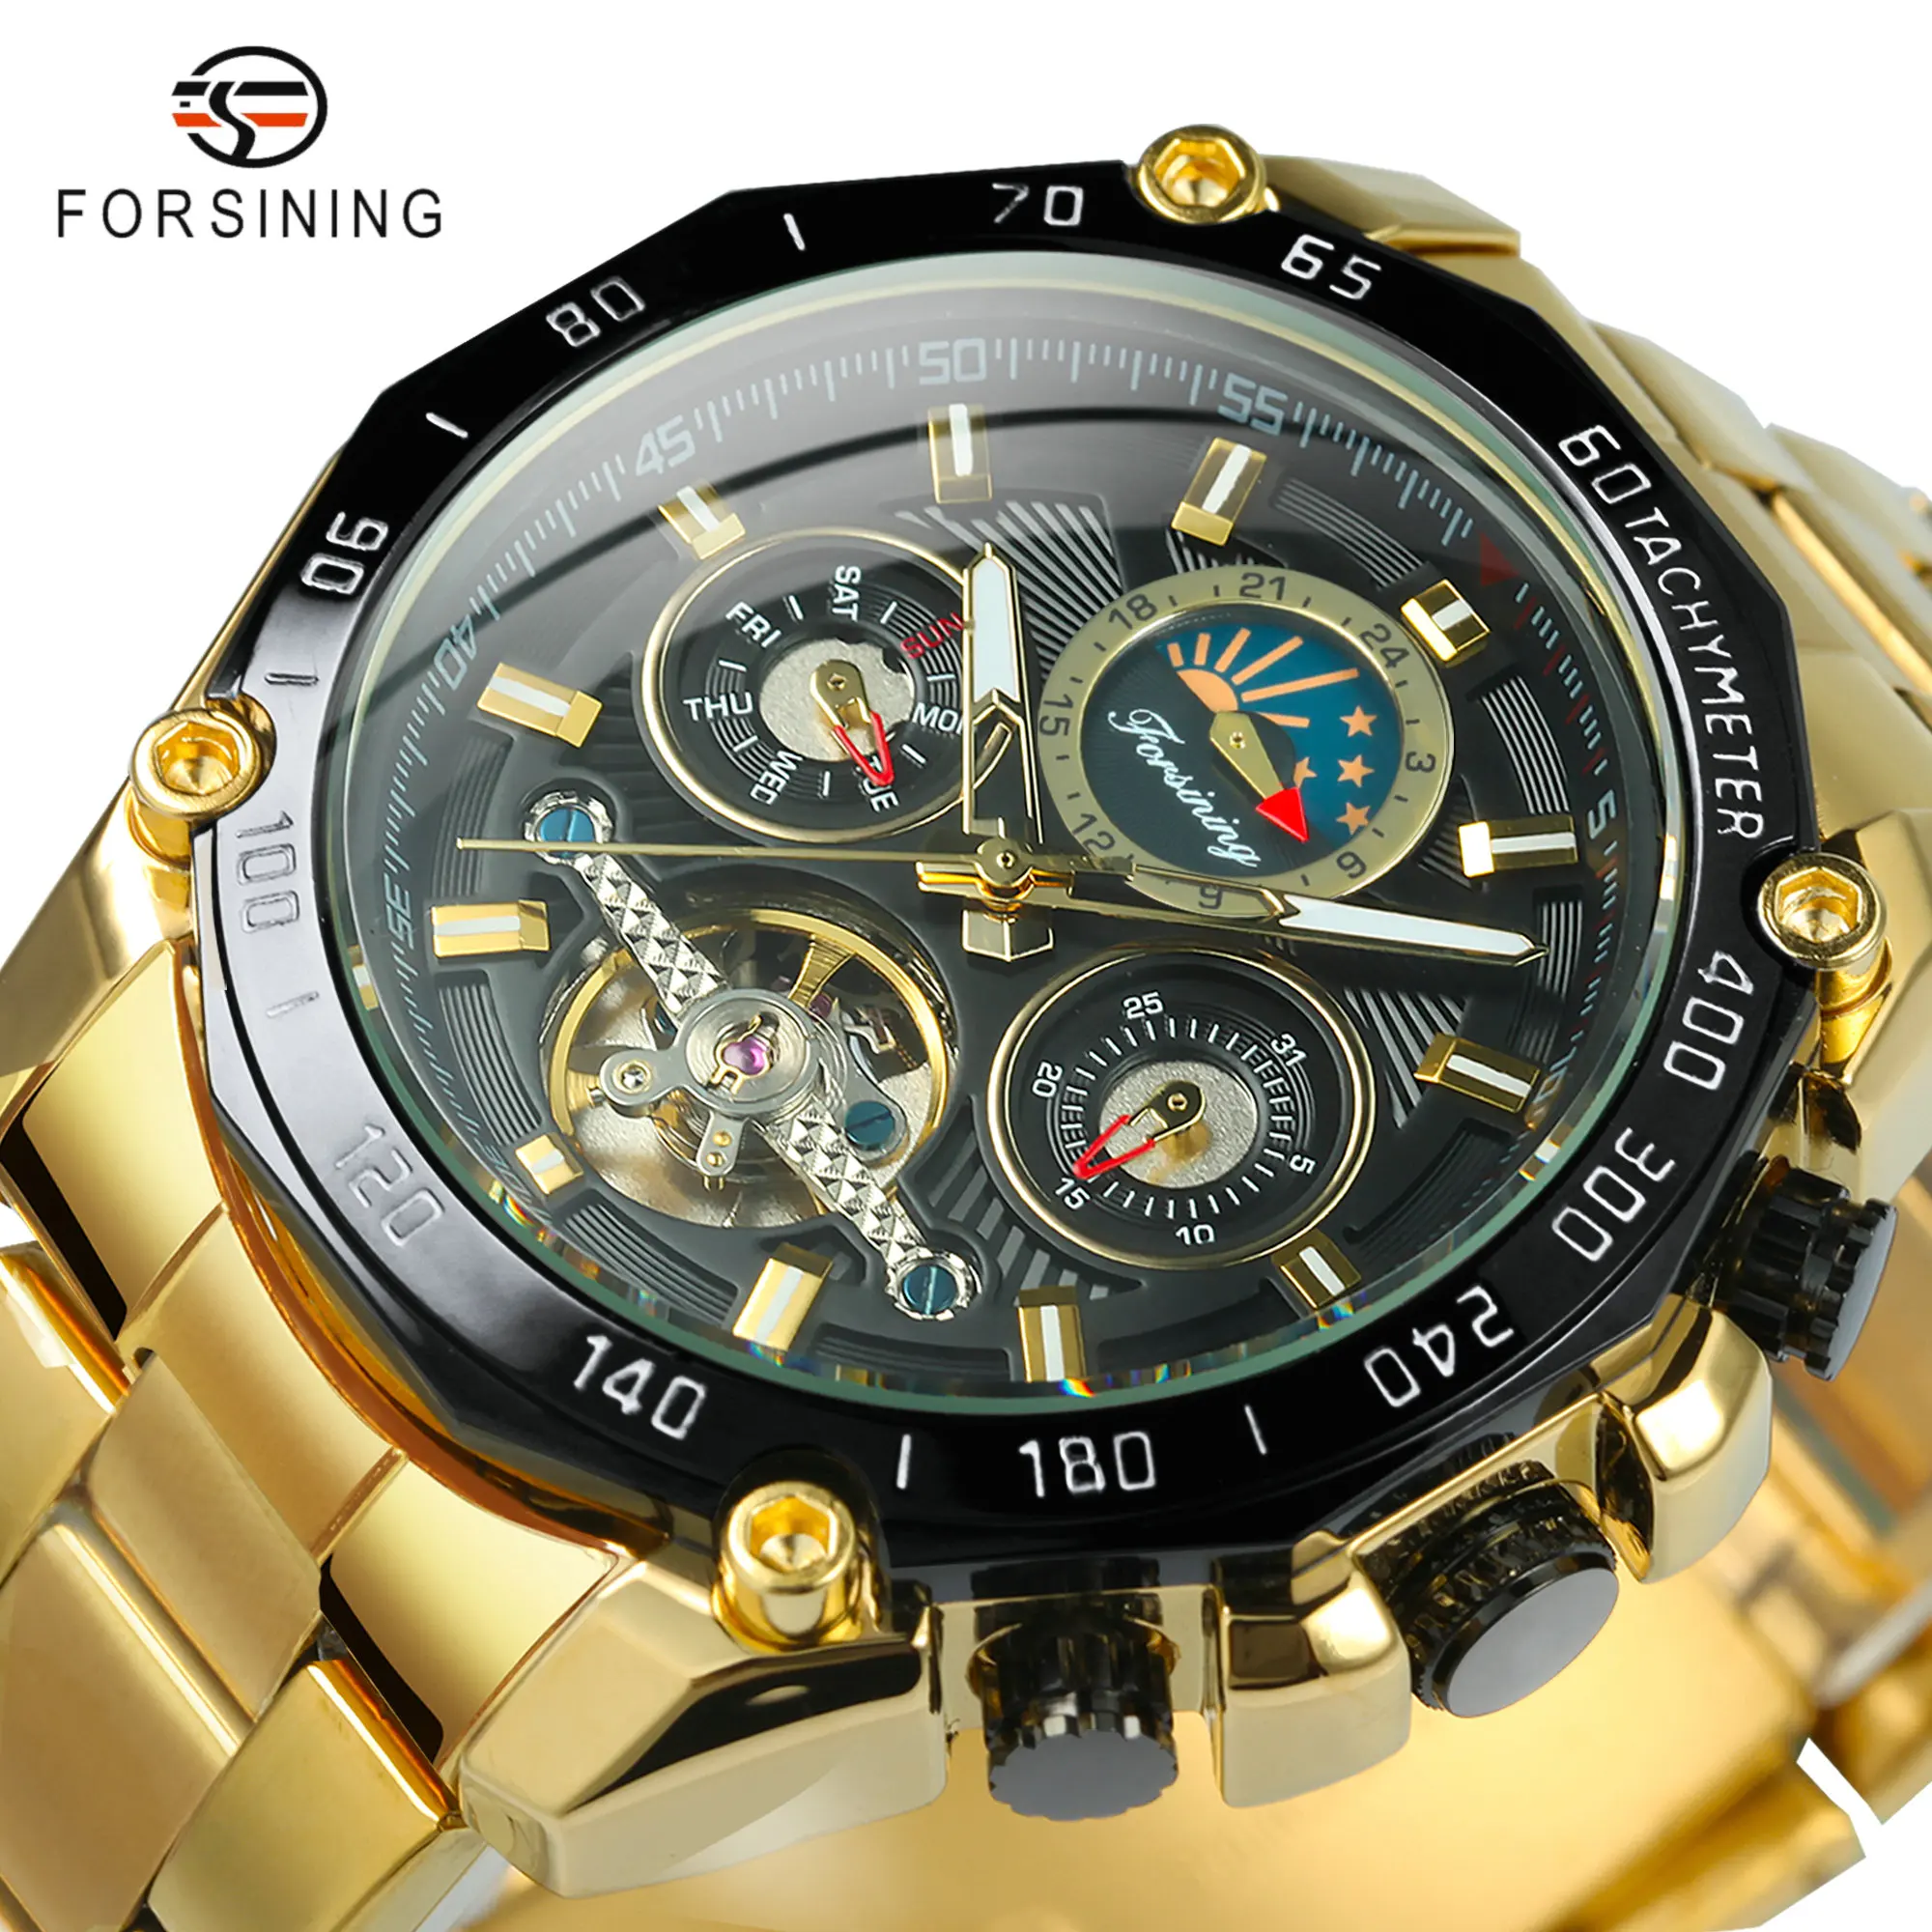 

Forsining Tourbillon Watch Moon Phase Automatic Mechanical Watches Mens Self-Winding Top Brand Sport Clock Relogio Masculino New